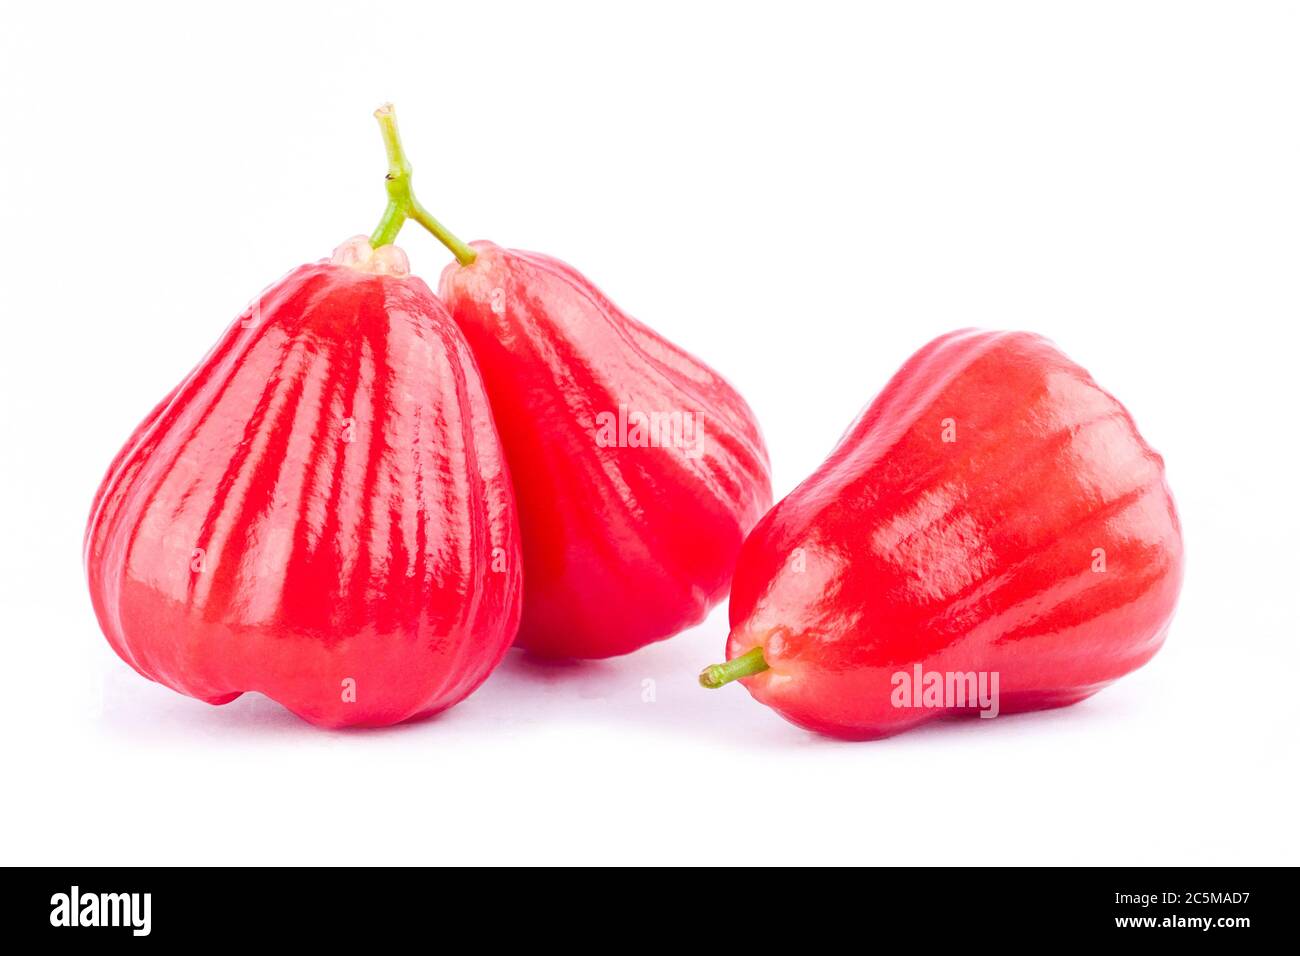 rose apple or chomphu on white background healthy rose apple fruit food isolated Stock Photo